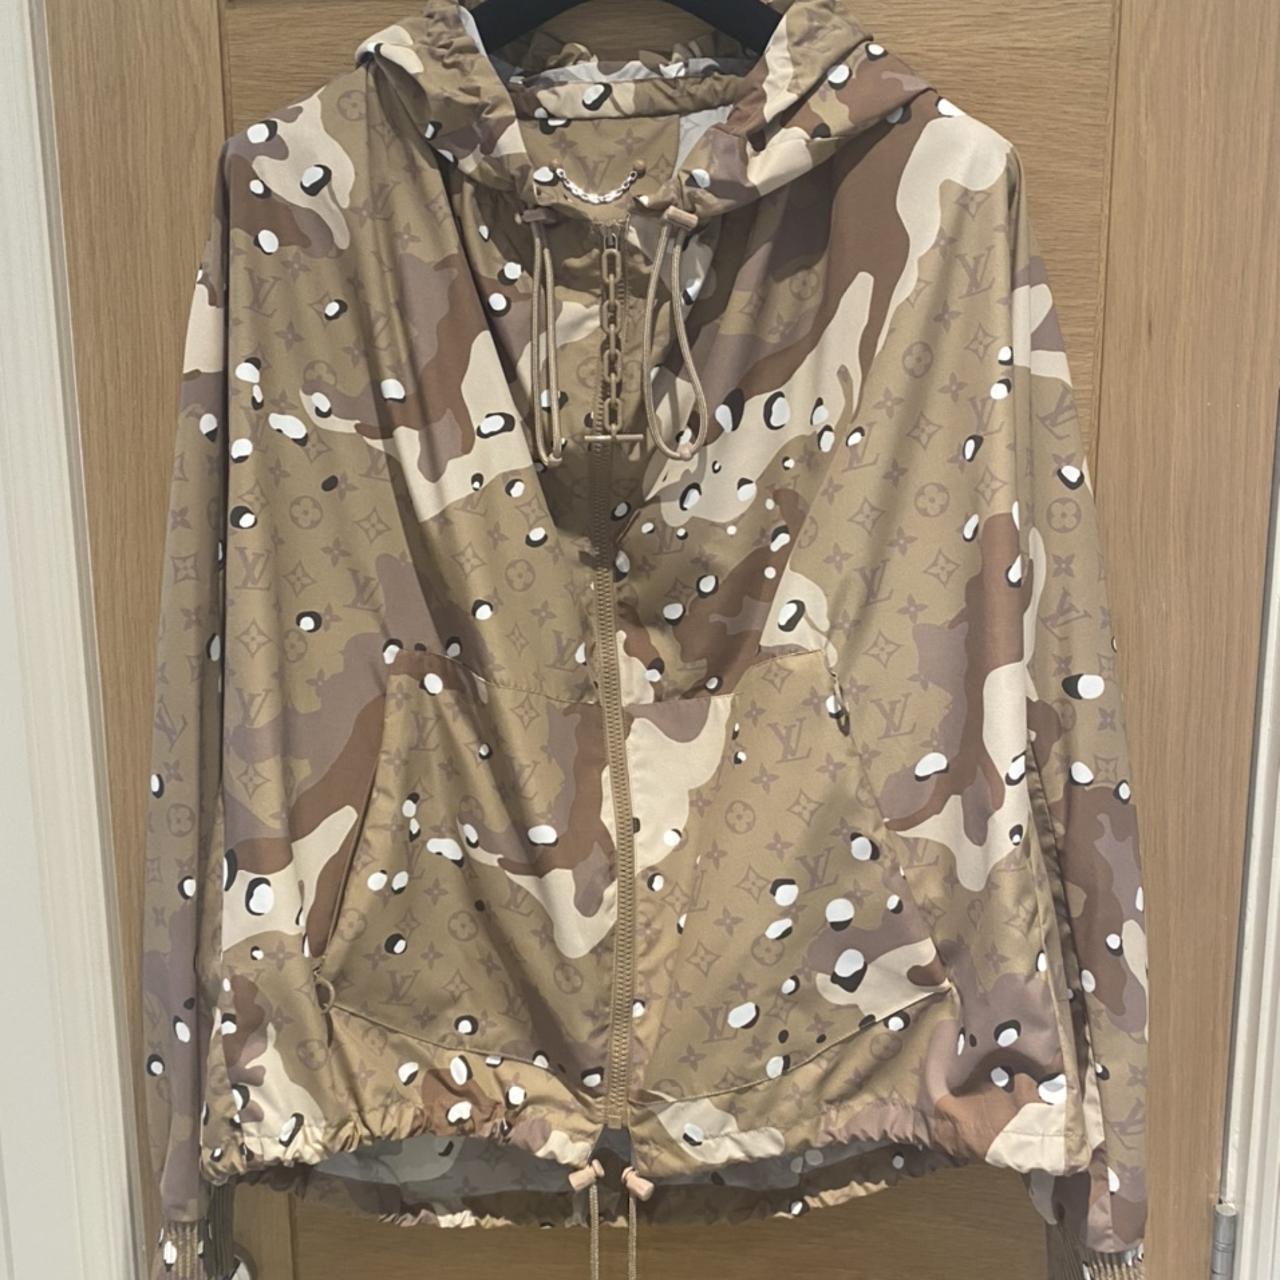 Louis Vuitton Men's LV Camouflage Double-Sided Trainer Jacket